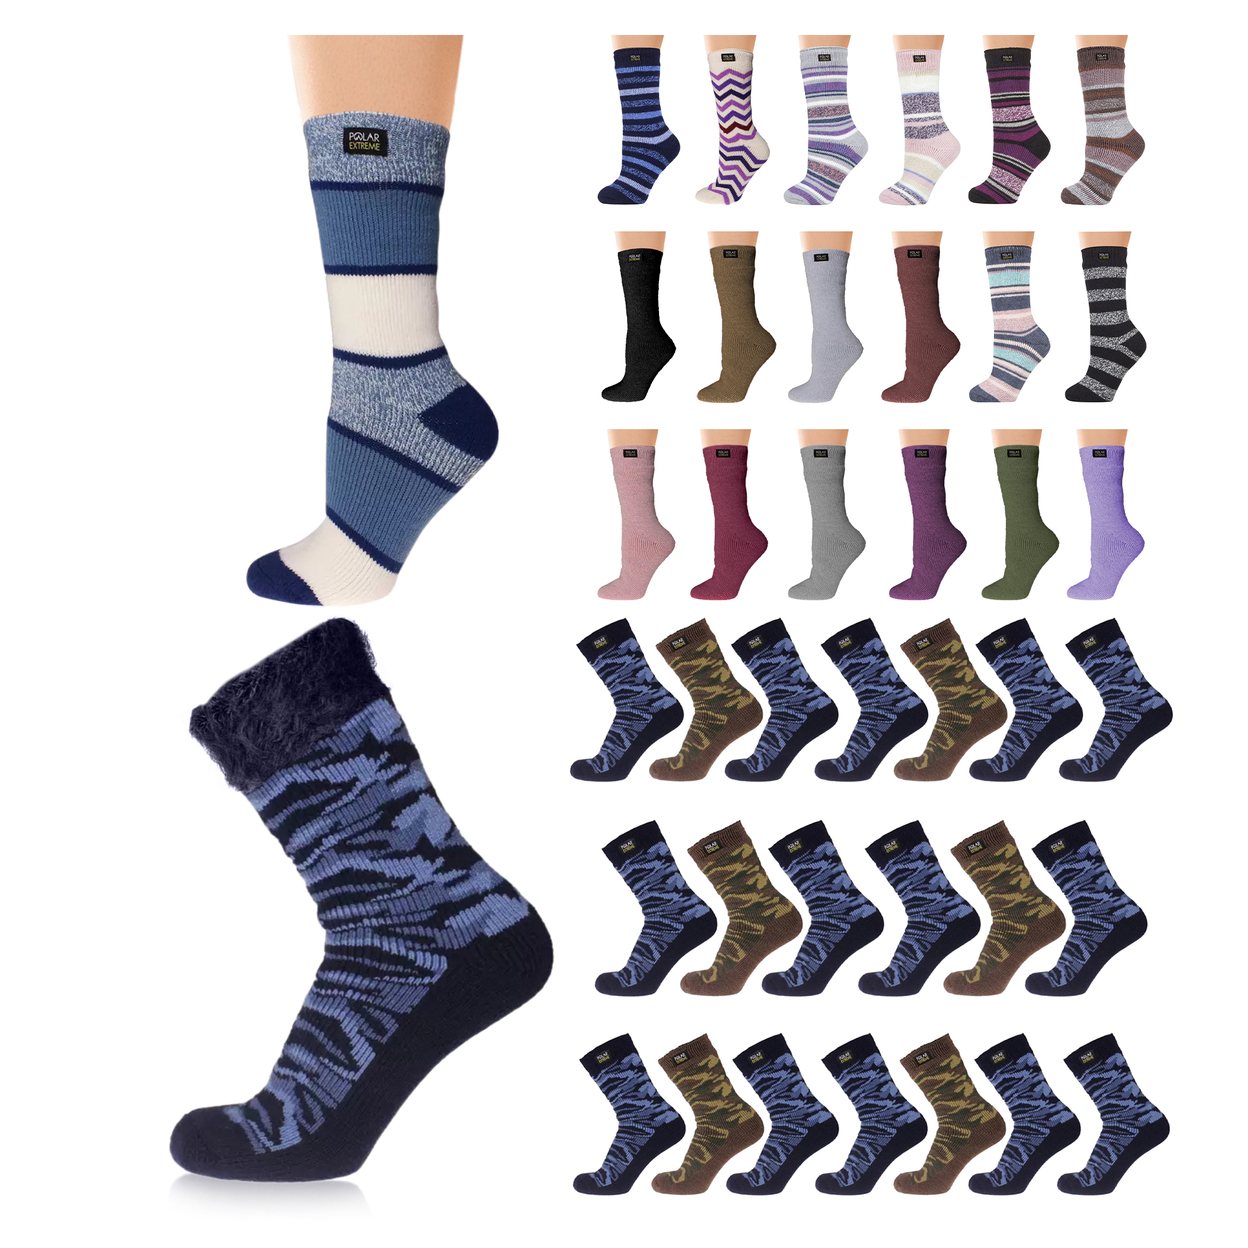 Men's & Women's Polar Extreme Insulated Thermal Ultra-Soft Winter Warm Crew Socks - Male